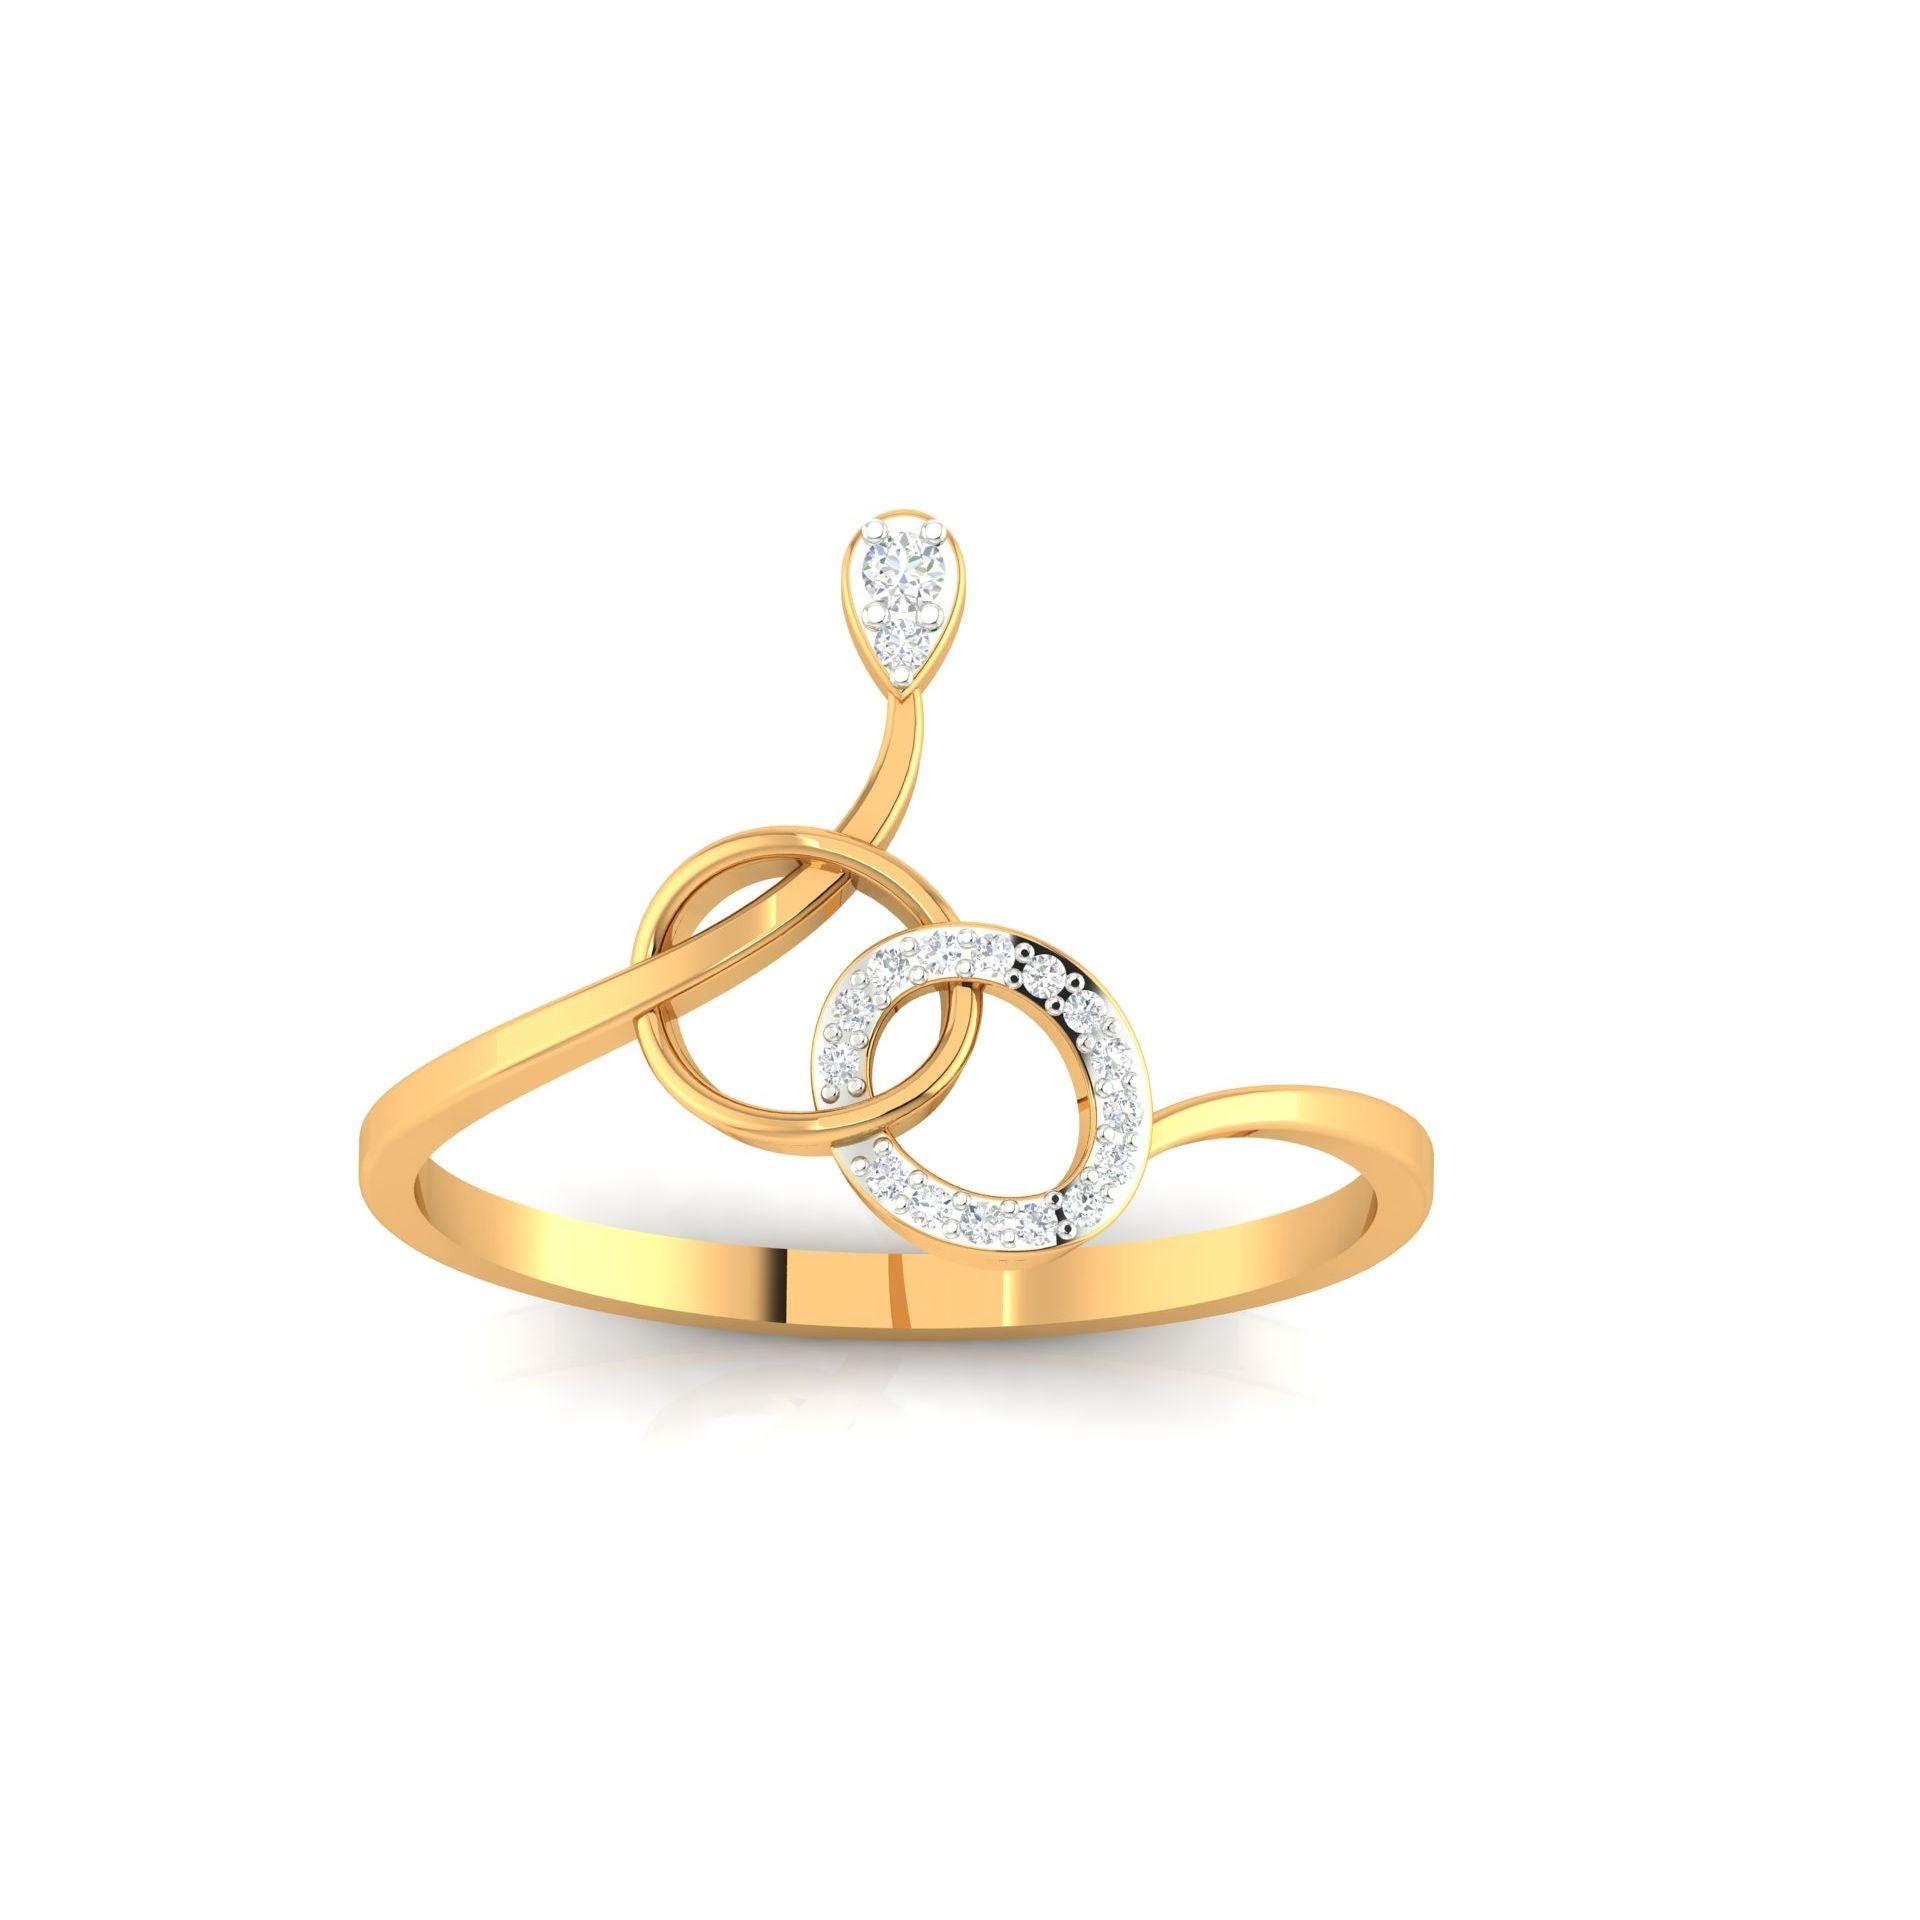 925 Silver Shimmering Beauty of Gold-Plated Ring AUS-336 - Auory